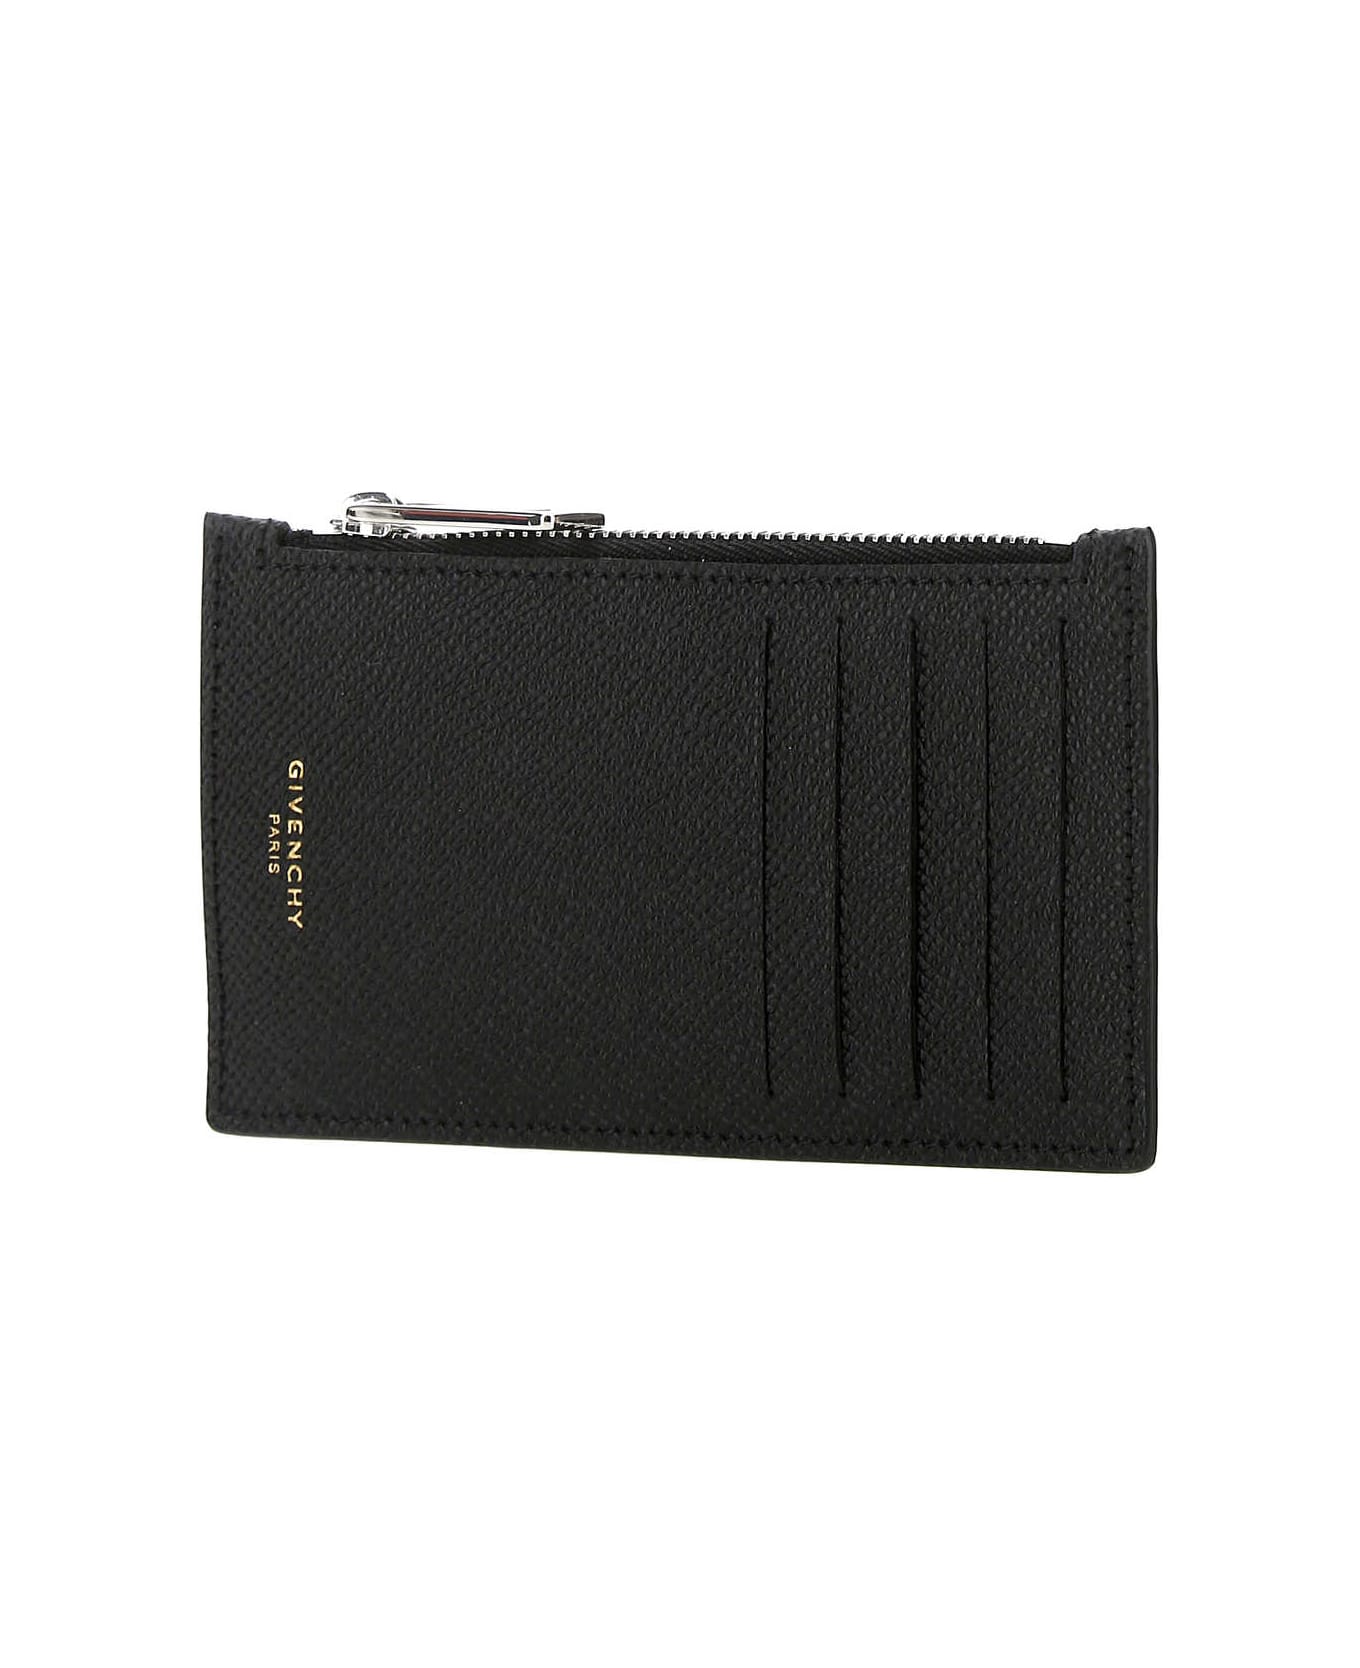 Givenchy Black Leather Card Holder - 001 財布